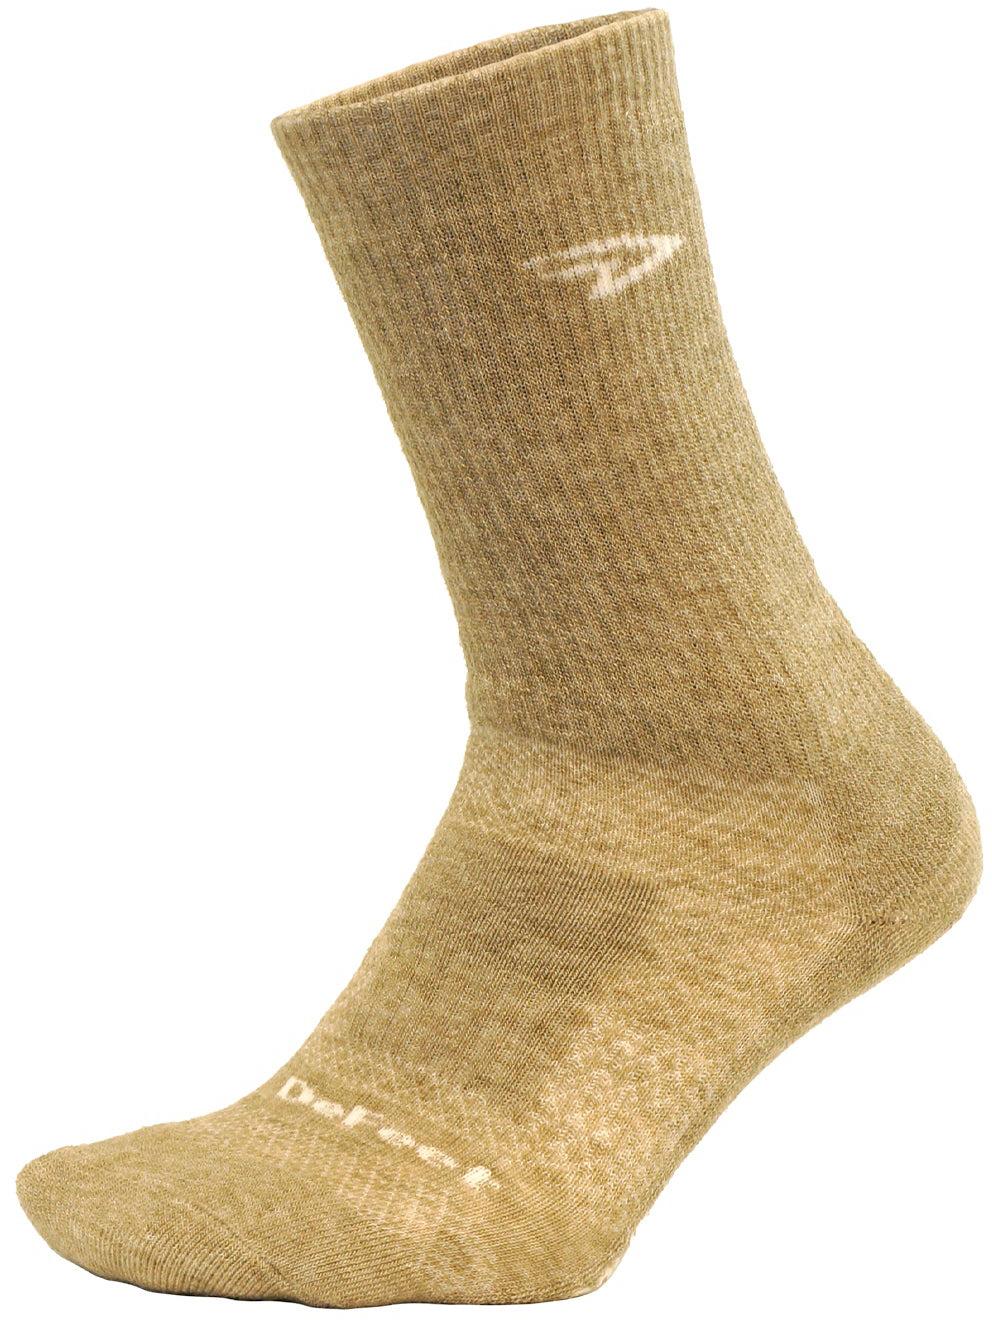 Image of Chaussette DeFeet Woolie Boolie Comp (15 cm environ) - Yellow